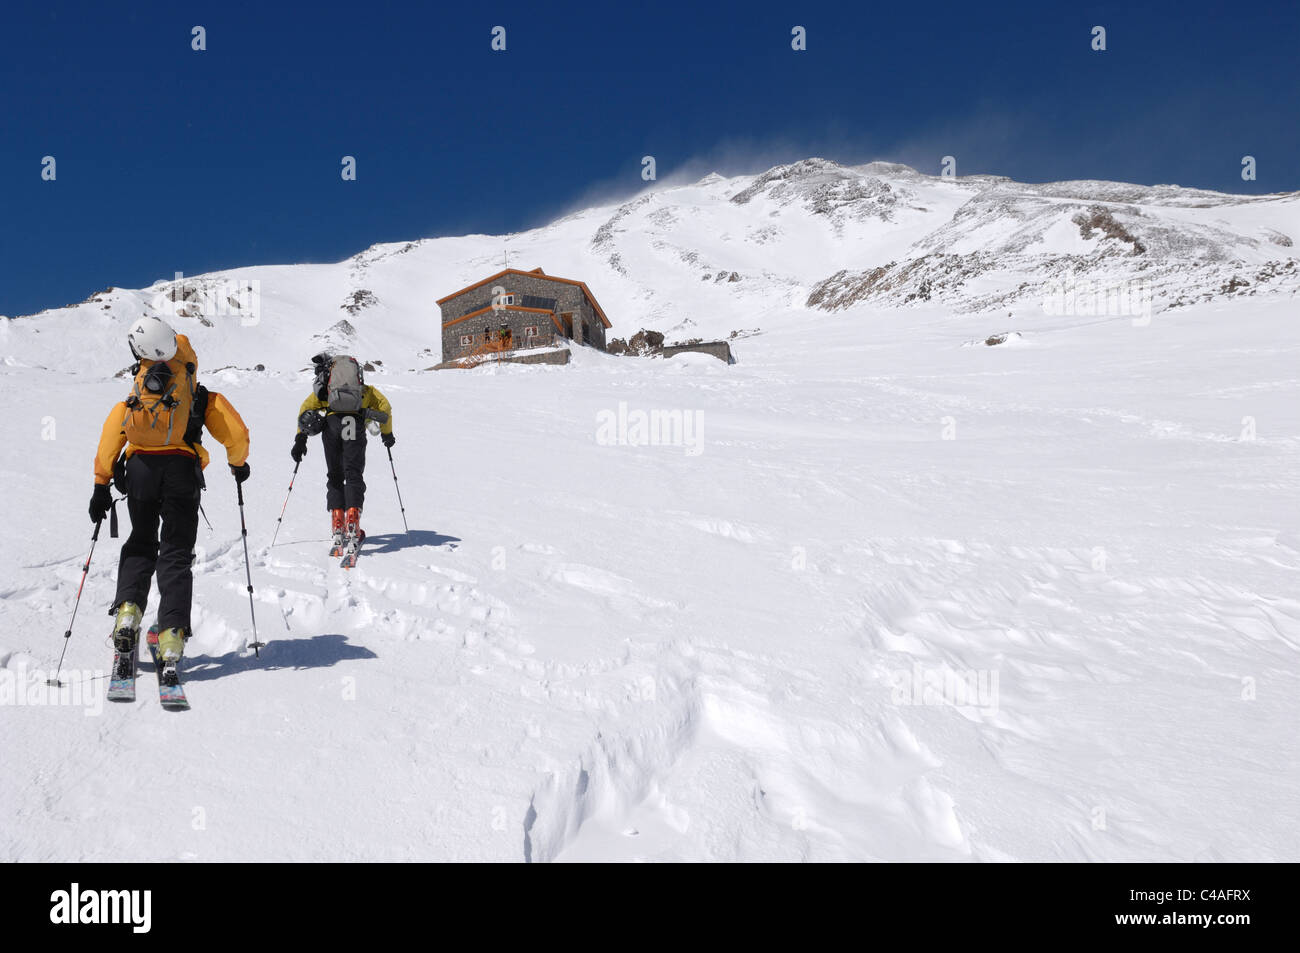 A man skinning up hill while ski mountaineering at altitude on Mount Damavand a volcano in the Alborz mountains Iran Stock Photo